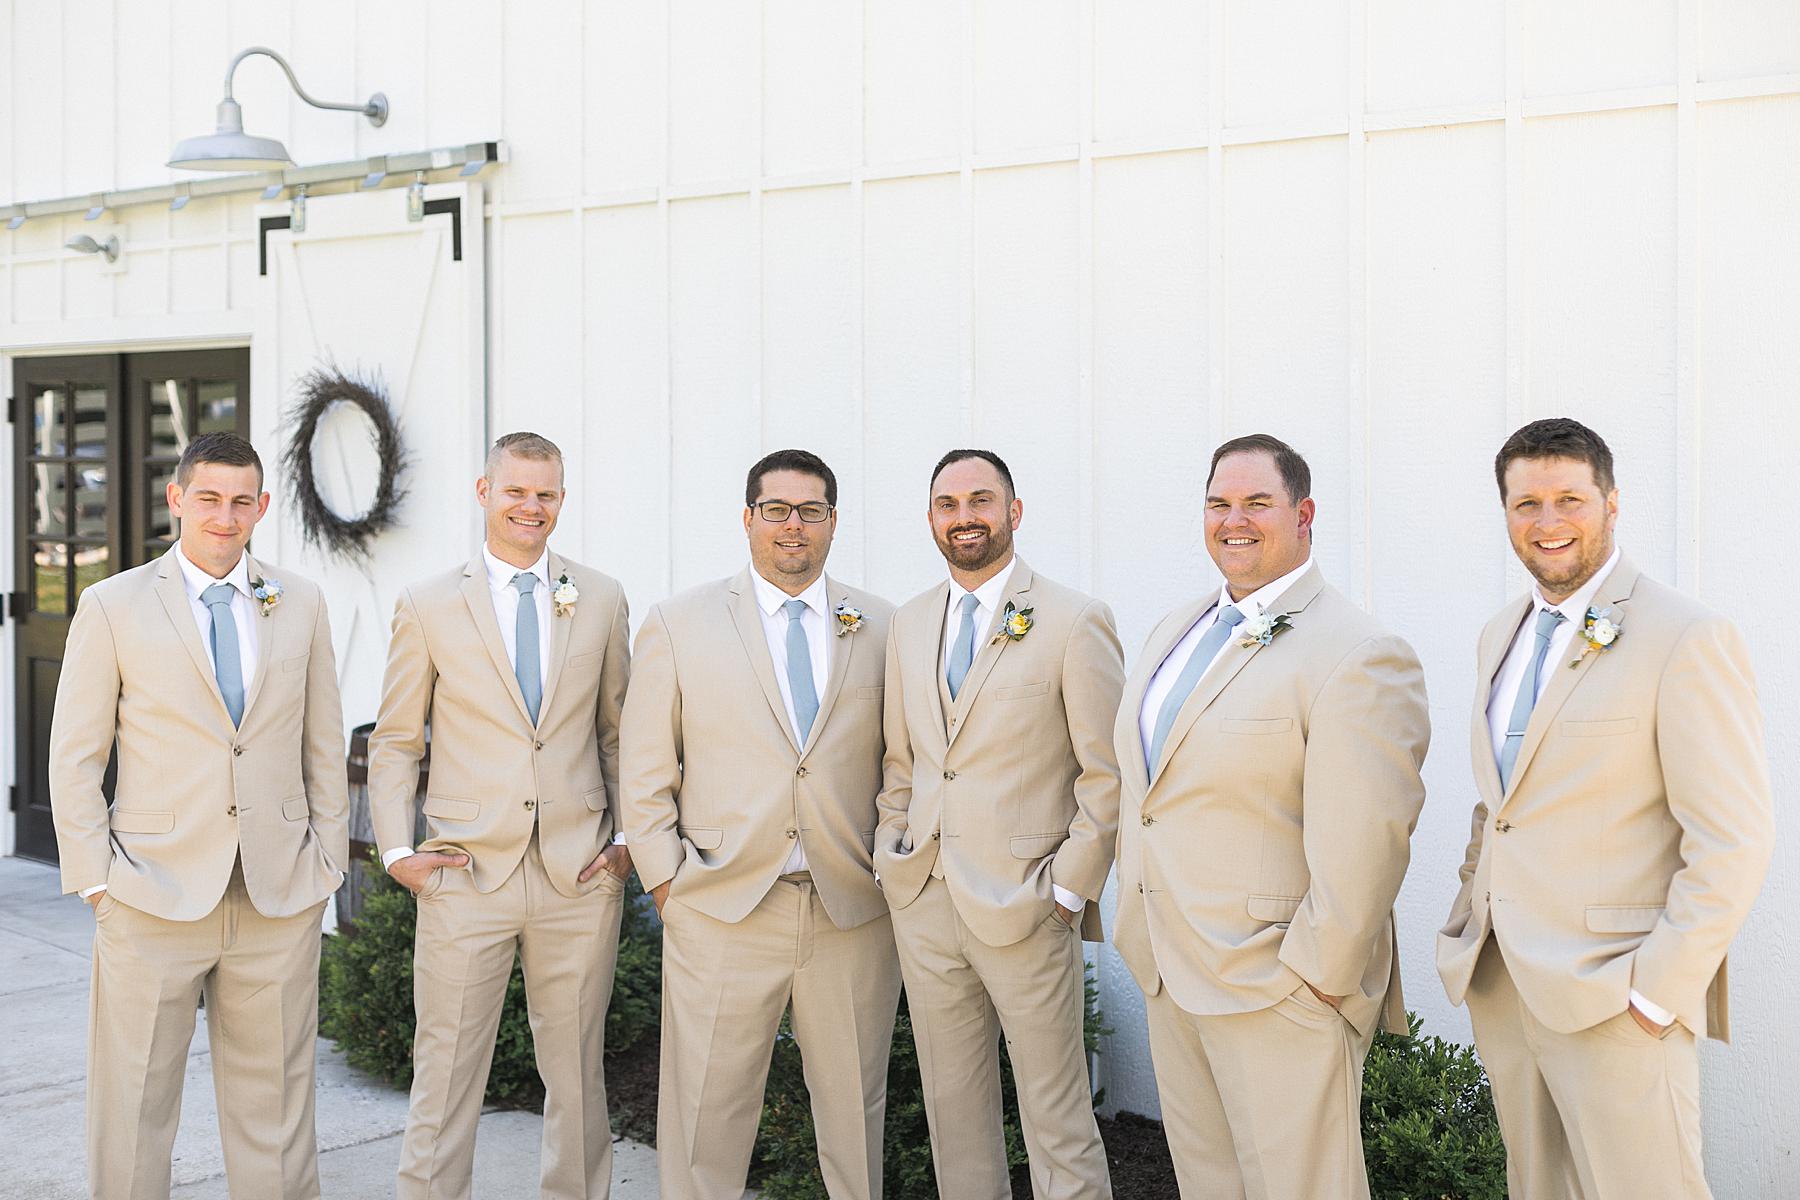 groom and groomsmen portrait photo in front of white barn, fields reserve near madison, wisconsin